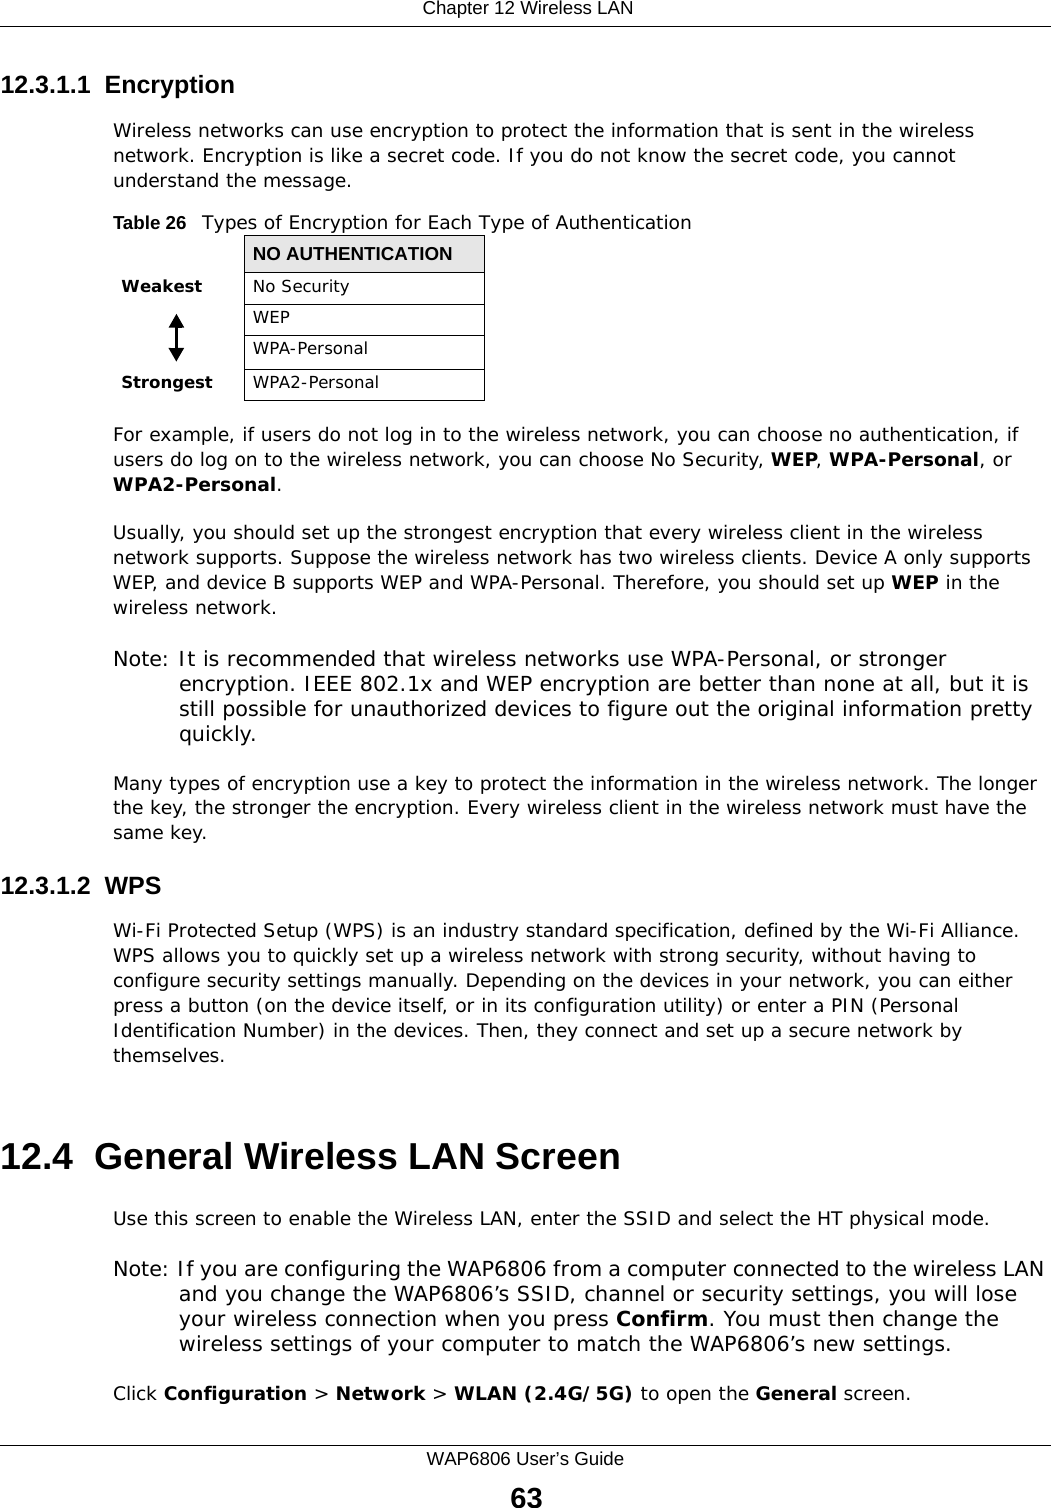  Chapter 12 Wireless LANWAP6806 User’s Guide6312.3.1.1  EncryptionWireless networks can use encryption to protect the information that is sent in the wireless network. Encryption is like a secret code. If you do not know the secret code, you cannot understand the message.For example, if users do not log in to the wireless network, you can choose no authentication, if users do log on to the wireless network, you can choose No Security, WEP, WPA-Personal, or WPA2-Personal.Usually, you should set up the strongest encryption that every wireless client in the wireless network supports. Suppose the wireless network has two wireless clients. Device A only supports WEP, and device B supports WEP and WPA-Personal. Therefore, you should set up WEP in the wireless network.Note: It is recommended that wireless networks use WPA-Personal, or stronger encryption. IEEE 802.1x and WEP encryption are better than none at all, but it is still possible for unauthorized devices to figure out the original information pretty quickly.Many types of encryption use a key to protect the information in the wireless network. The longer the key, the stronger the encryption. Every wireless client in the wireless network must have the same key.12.3.1.2  WPSWi-Fi Protected Setup (WPS) is an industry standard specification, defined by the Wi-Fi Alliance. WPS allows you to quickly set up a wireless network with strong security, without having to configure security settings manually. Depending on the devices in your network, you can either press a button (on the device itself, or in its configuration utility) or enter a PIN (Personal Identification Number) in the devices. Then, they connect and set up a secure network by themselves.  12.4  General Wireless LAN Screen Use this screen to enable the Wireless LAN, enter the SSID and select the HT physical mode.Note: If you are configuring the WAP6806 from a computer connected to the wireless LAN and you change the WAP6806’s SSID, channel or security settings, you will lose your wireless connection when you press Confirm. You must then change the wireless settings of your computer to match the WAP6806’s new settings.Click Configuration &gt; Network &gt; WLAN (2.4G/5G) to open the General screen.Table 26   Types of Encryption for Each Type of AuthenticationNO AUTHENTICATIONWeakest No SecurityWEPWPA-PersonalStrongest WPA2-Personal